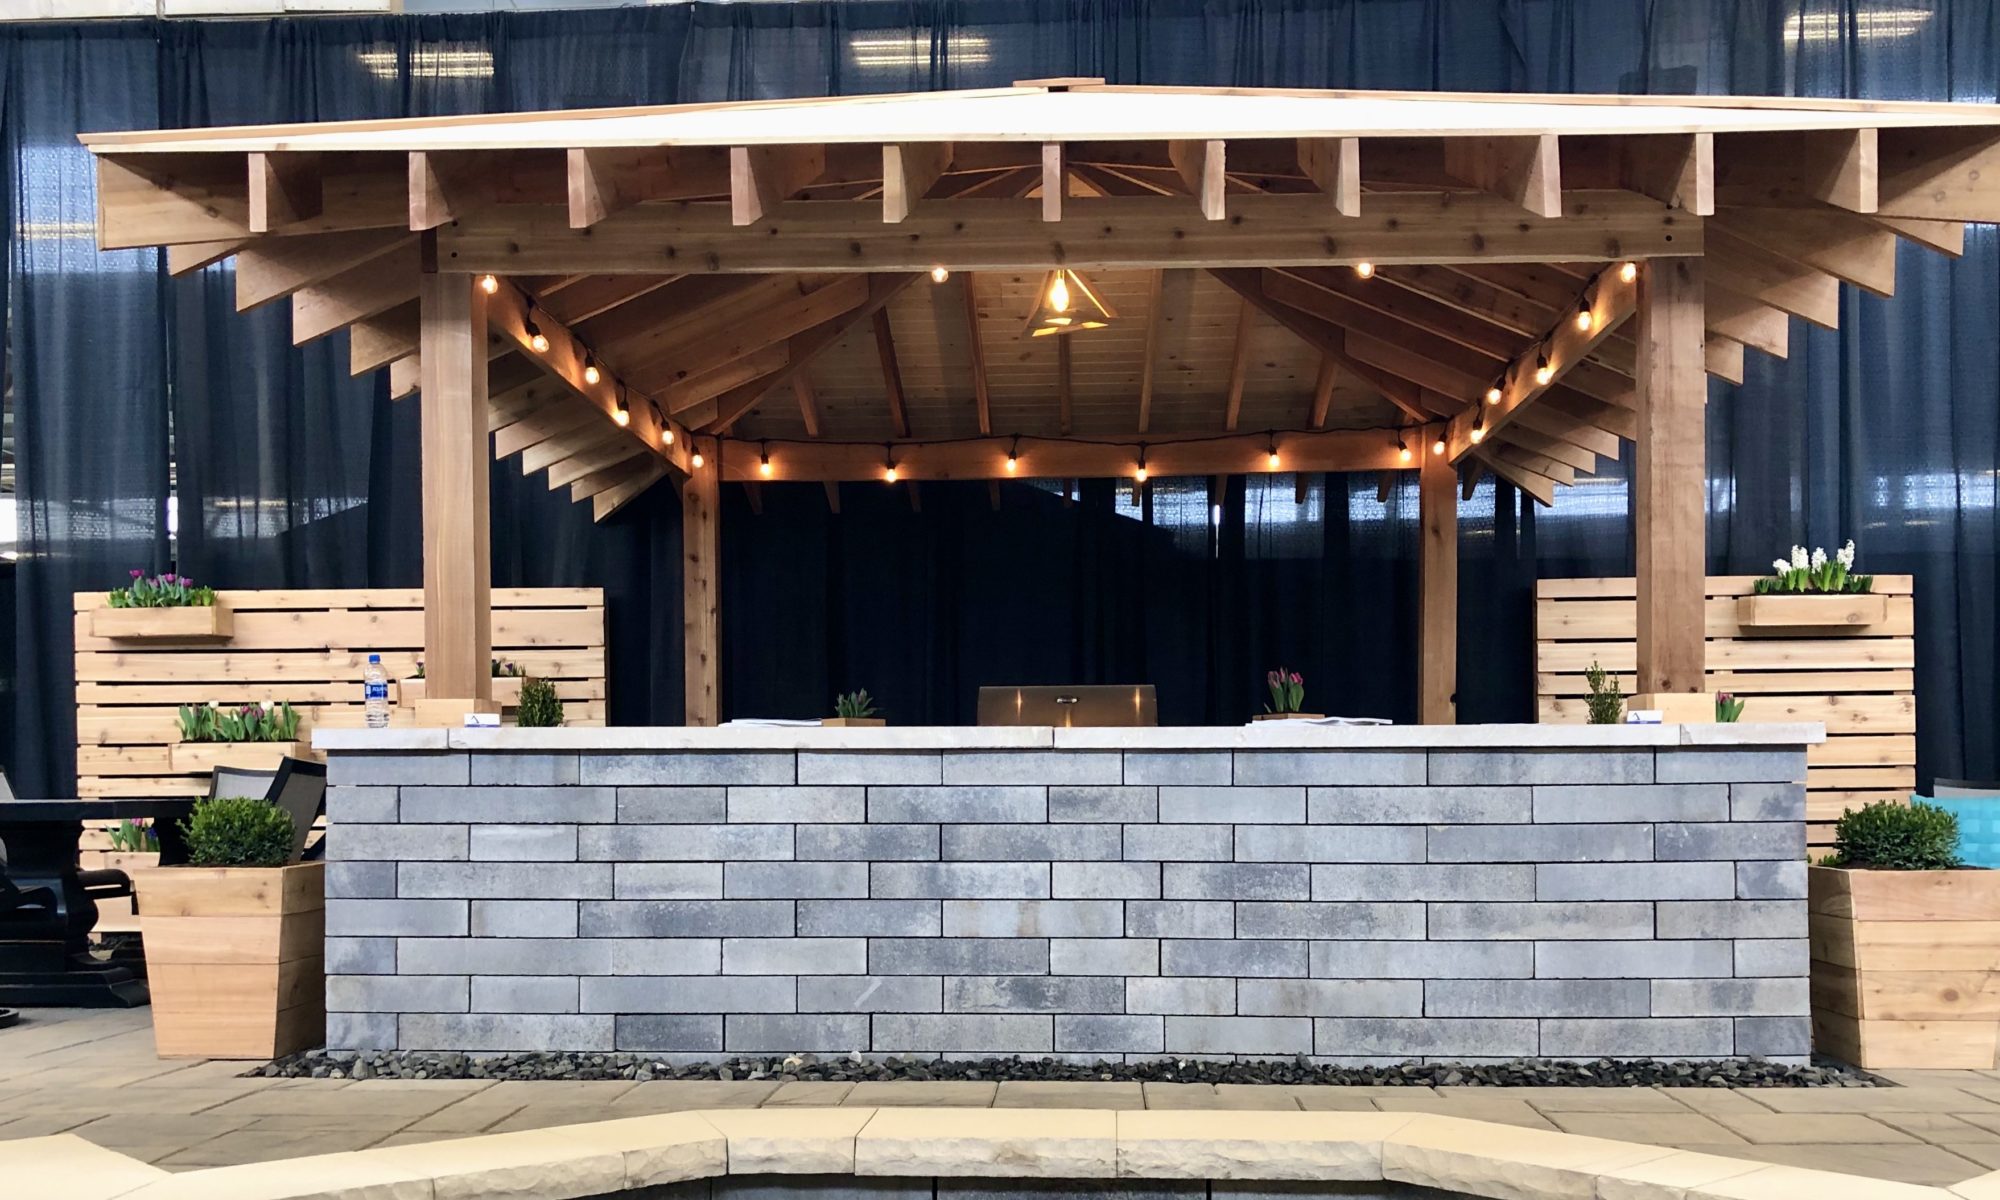 Flower and Patio Show 2019 Precision Outdoors Indianapolis Indiana sunken porcelain firepit fire pit space freestanding water wall structure cedar pergola screening walls privacy walls custom planters rough cedar pavilion gathering space outdoor kitchen grill bar space walls walkways